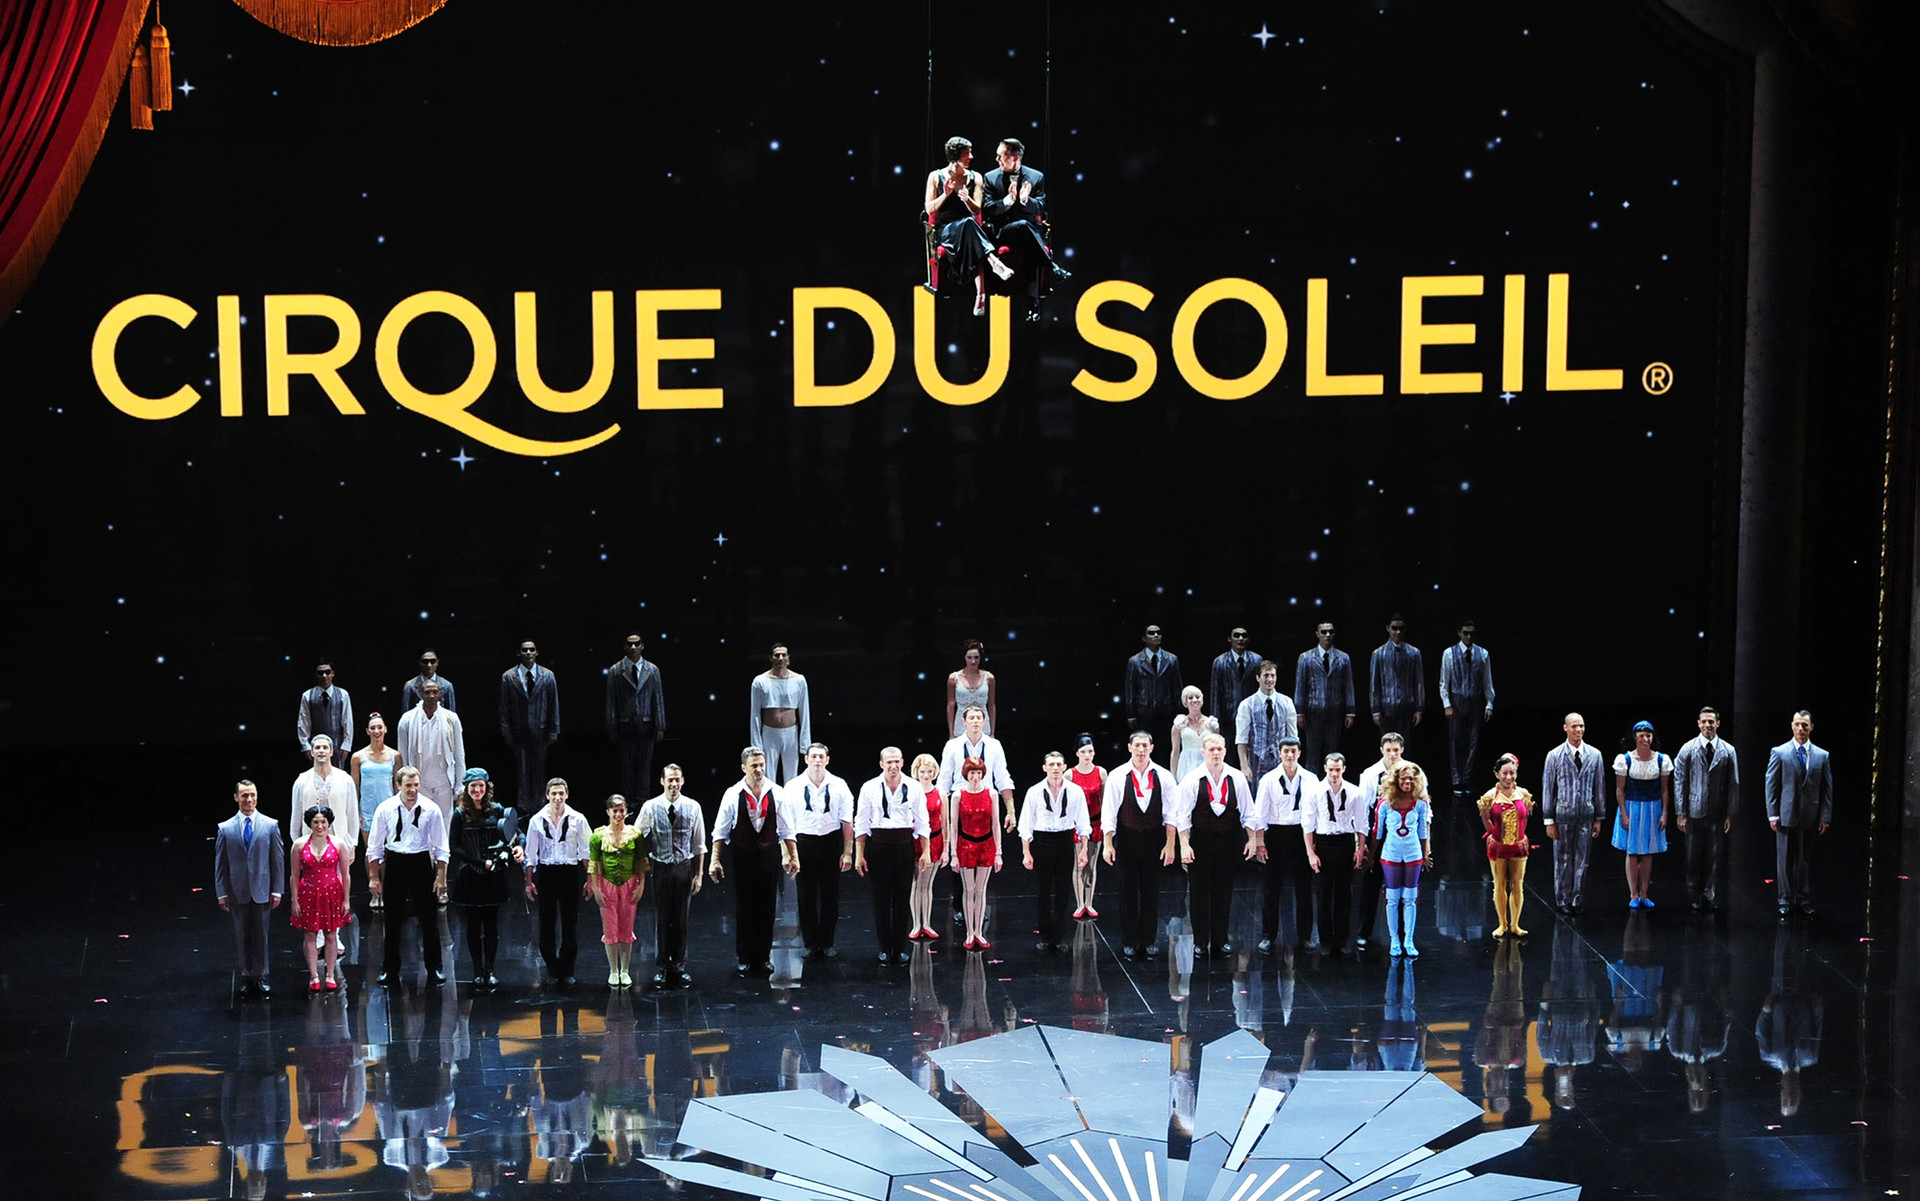 Cirque du Soleil deny allegations they are poaching Russian talent